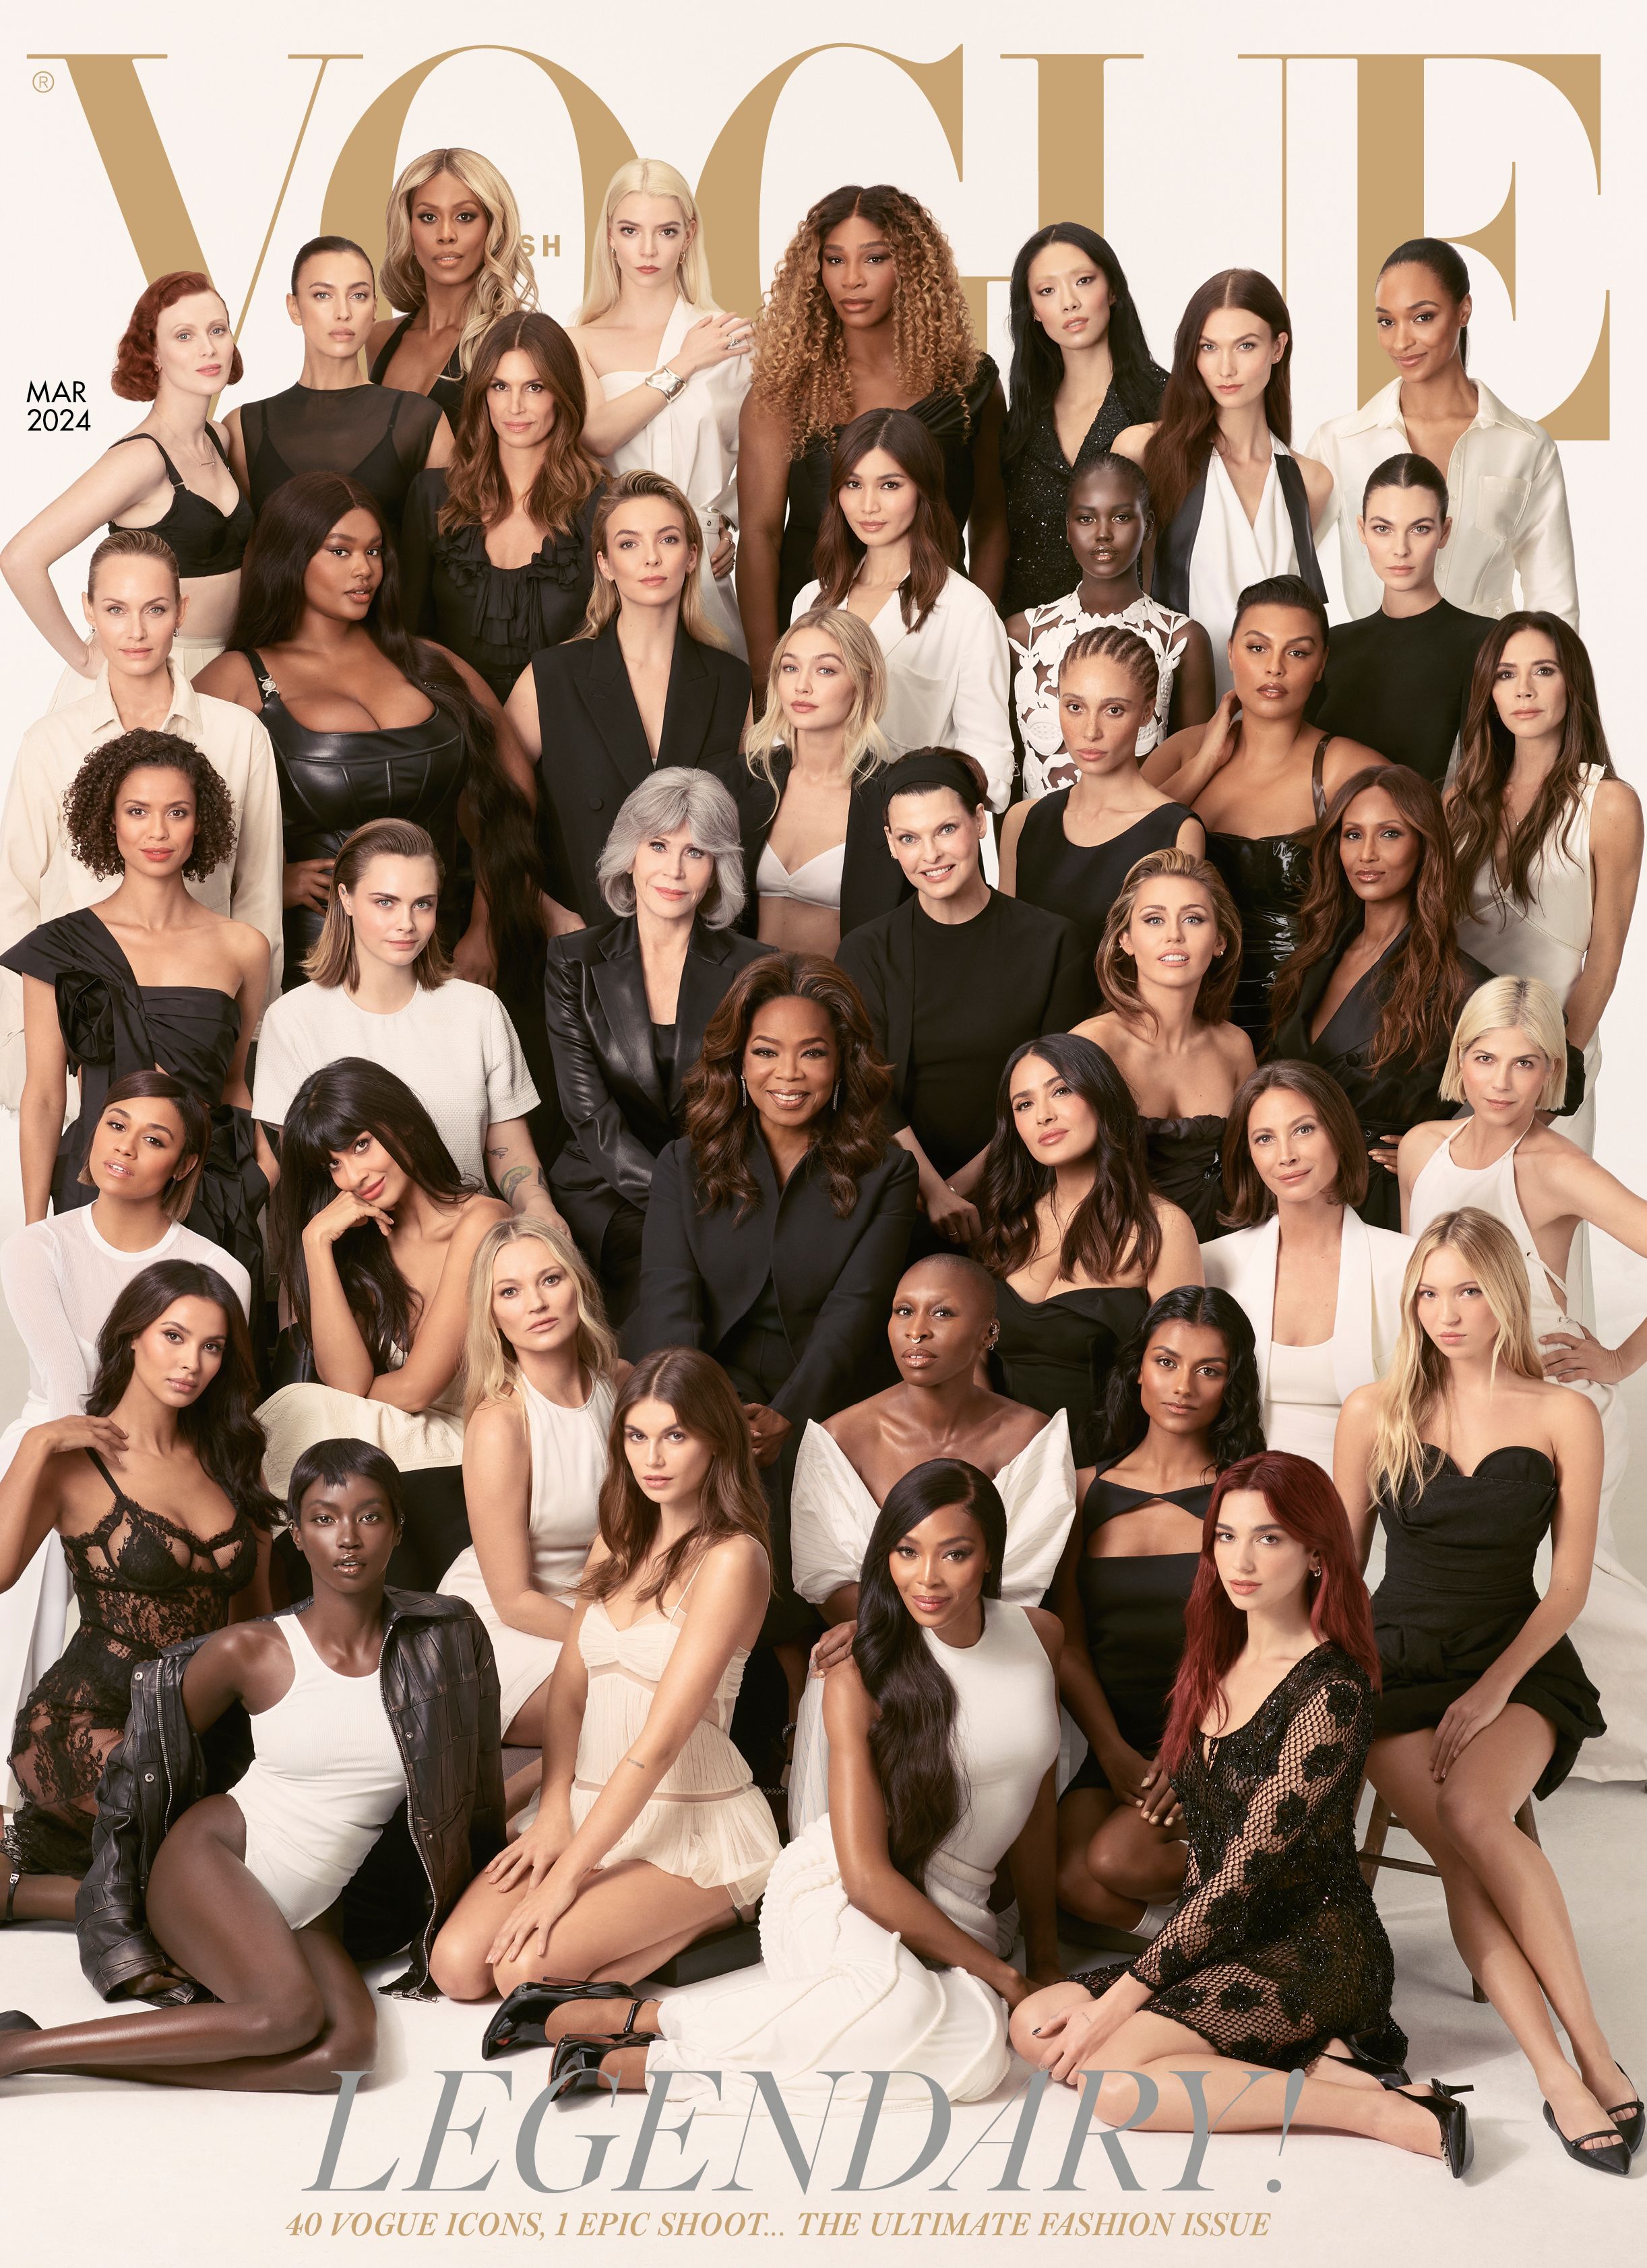 British Vogue features 40 'legendary' cover stars for editor Edward  Enninful's final issue